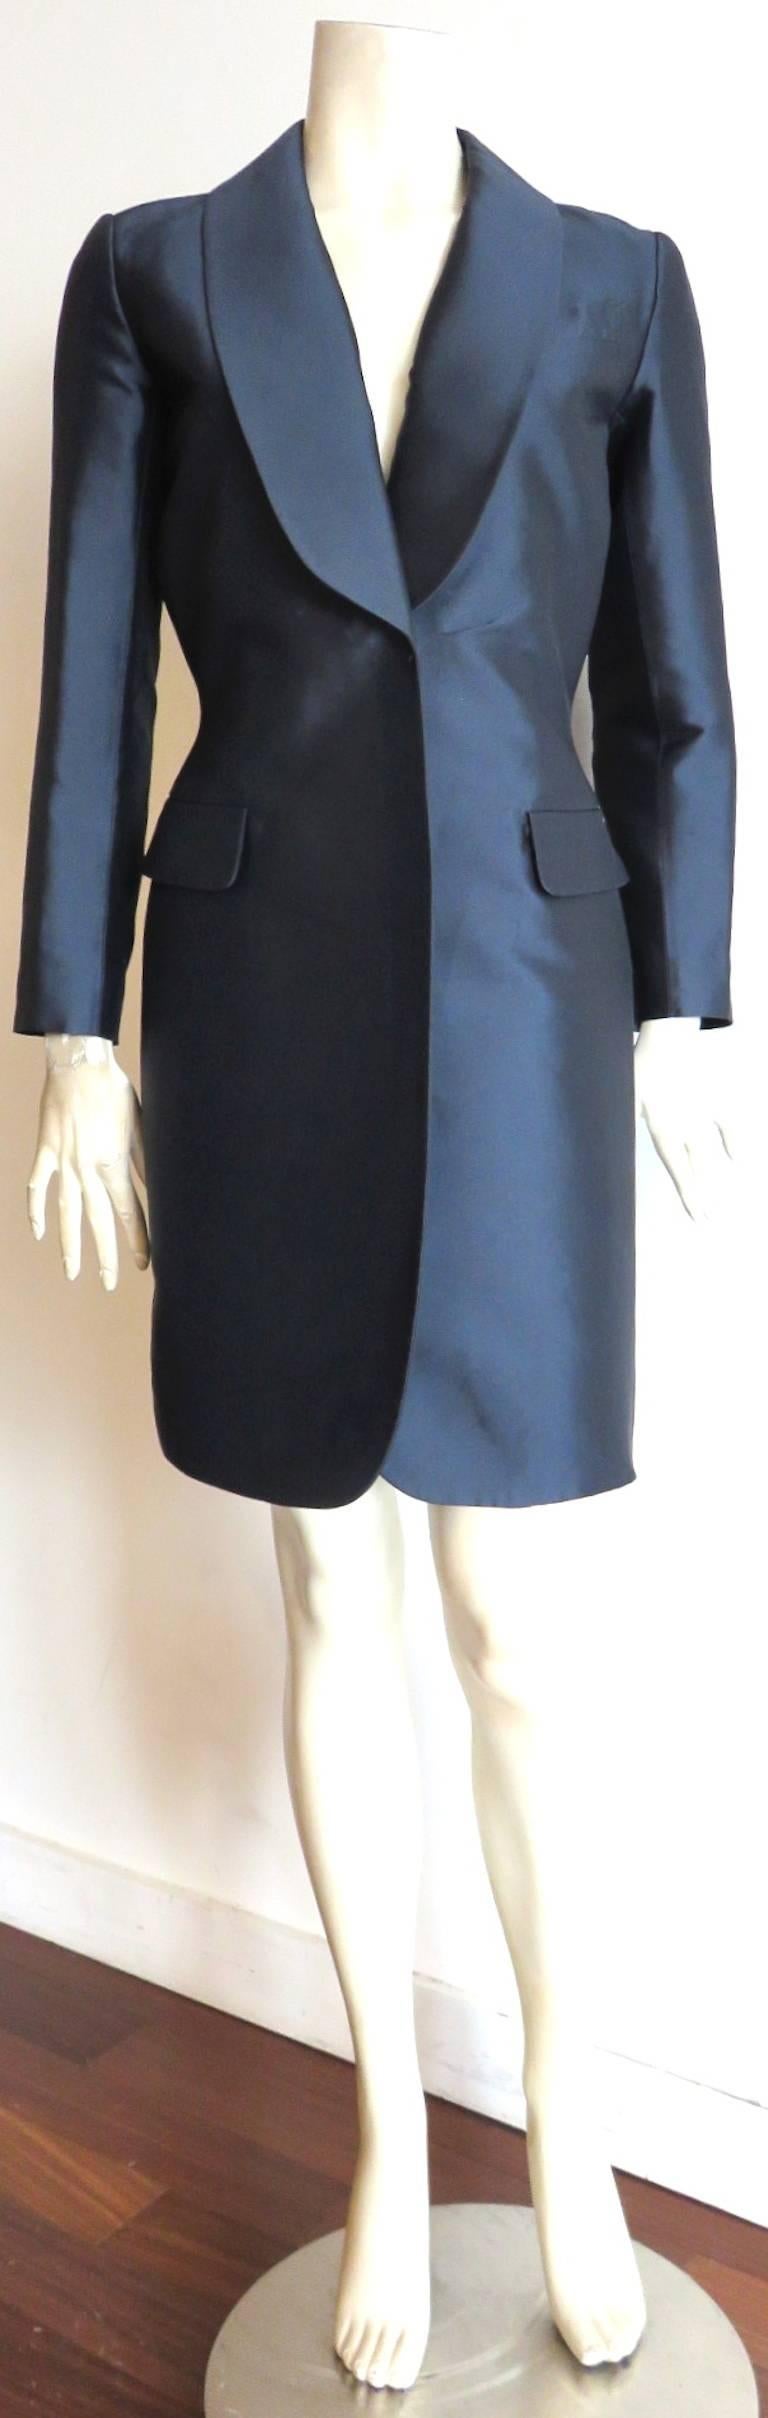 LOUIS VUITTON Silk satin evening coat with dress-style back  In Good Condition For Sale In Newport Beach, CA